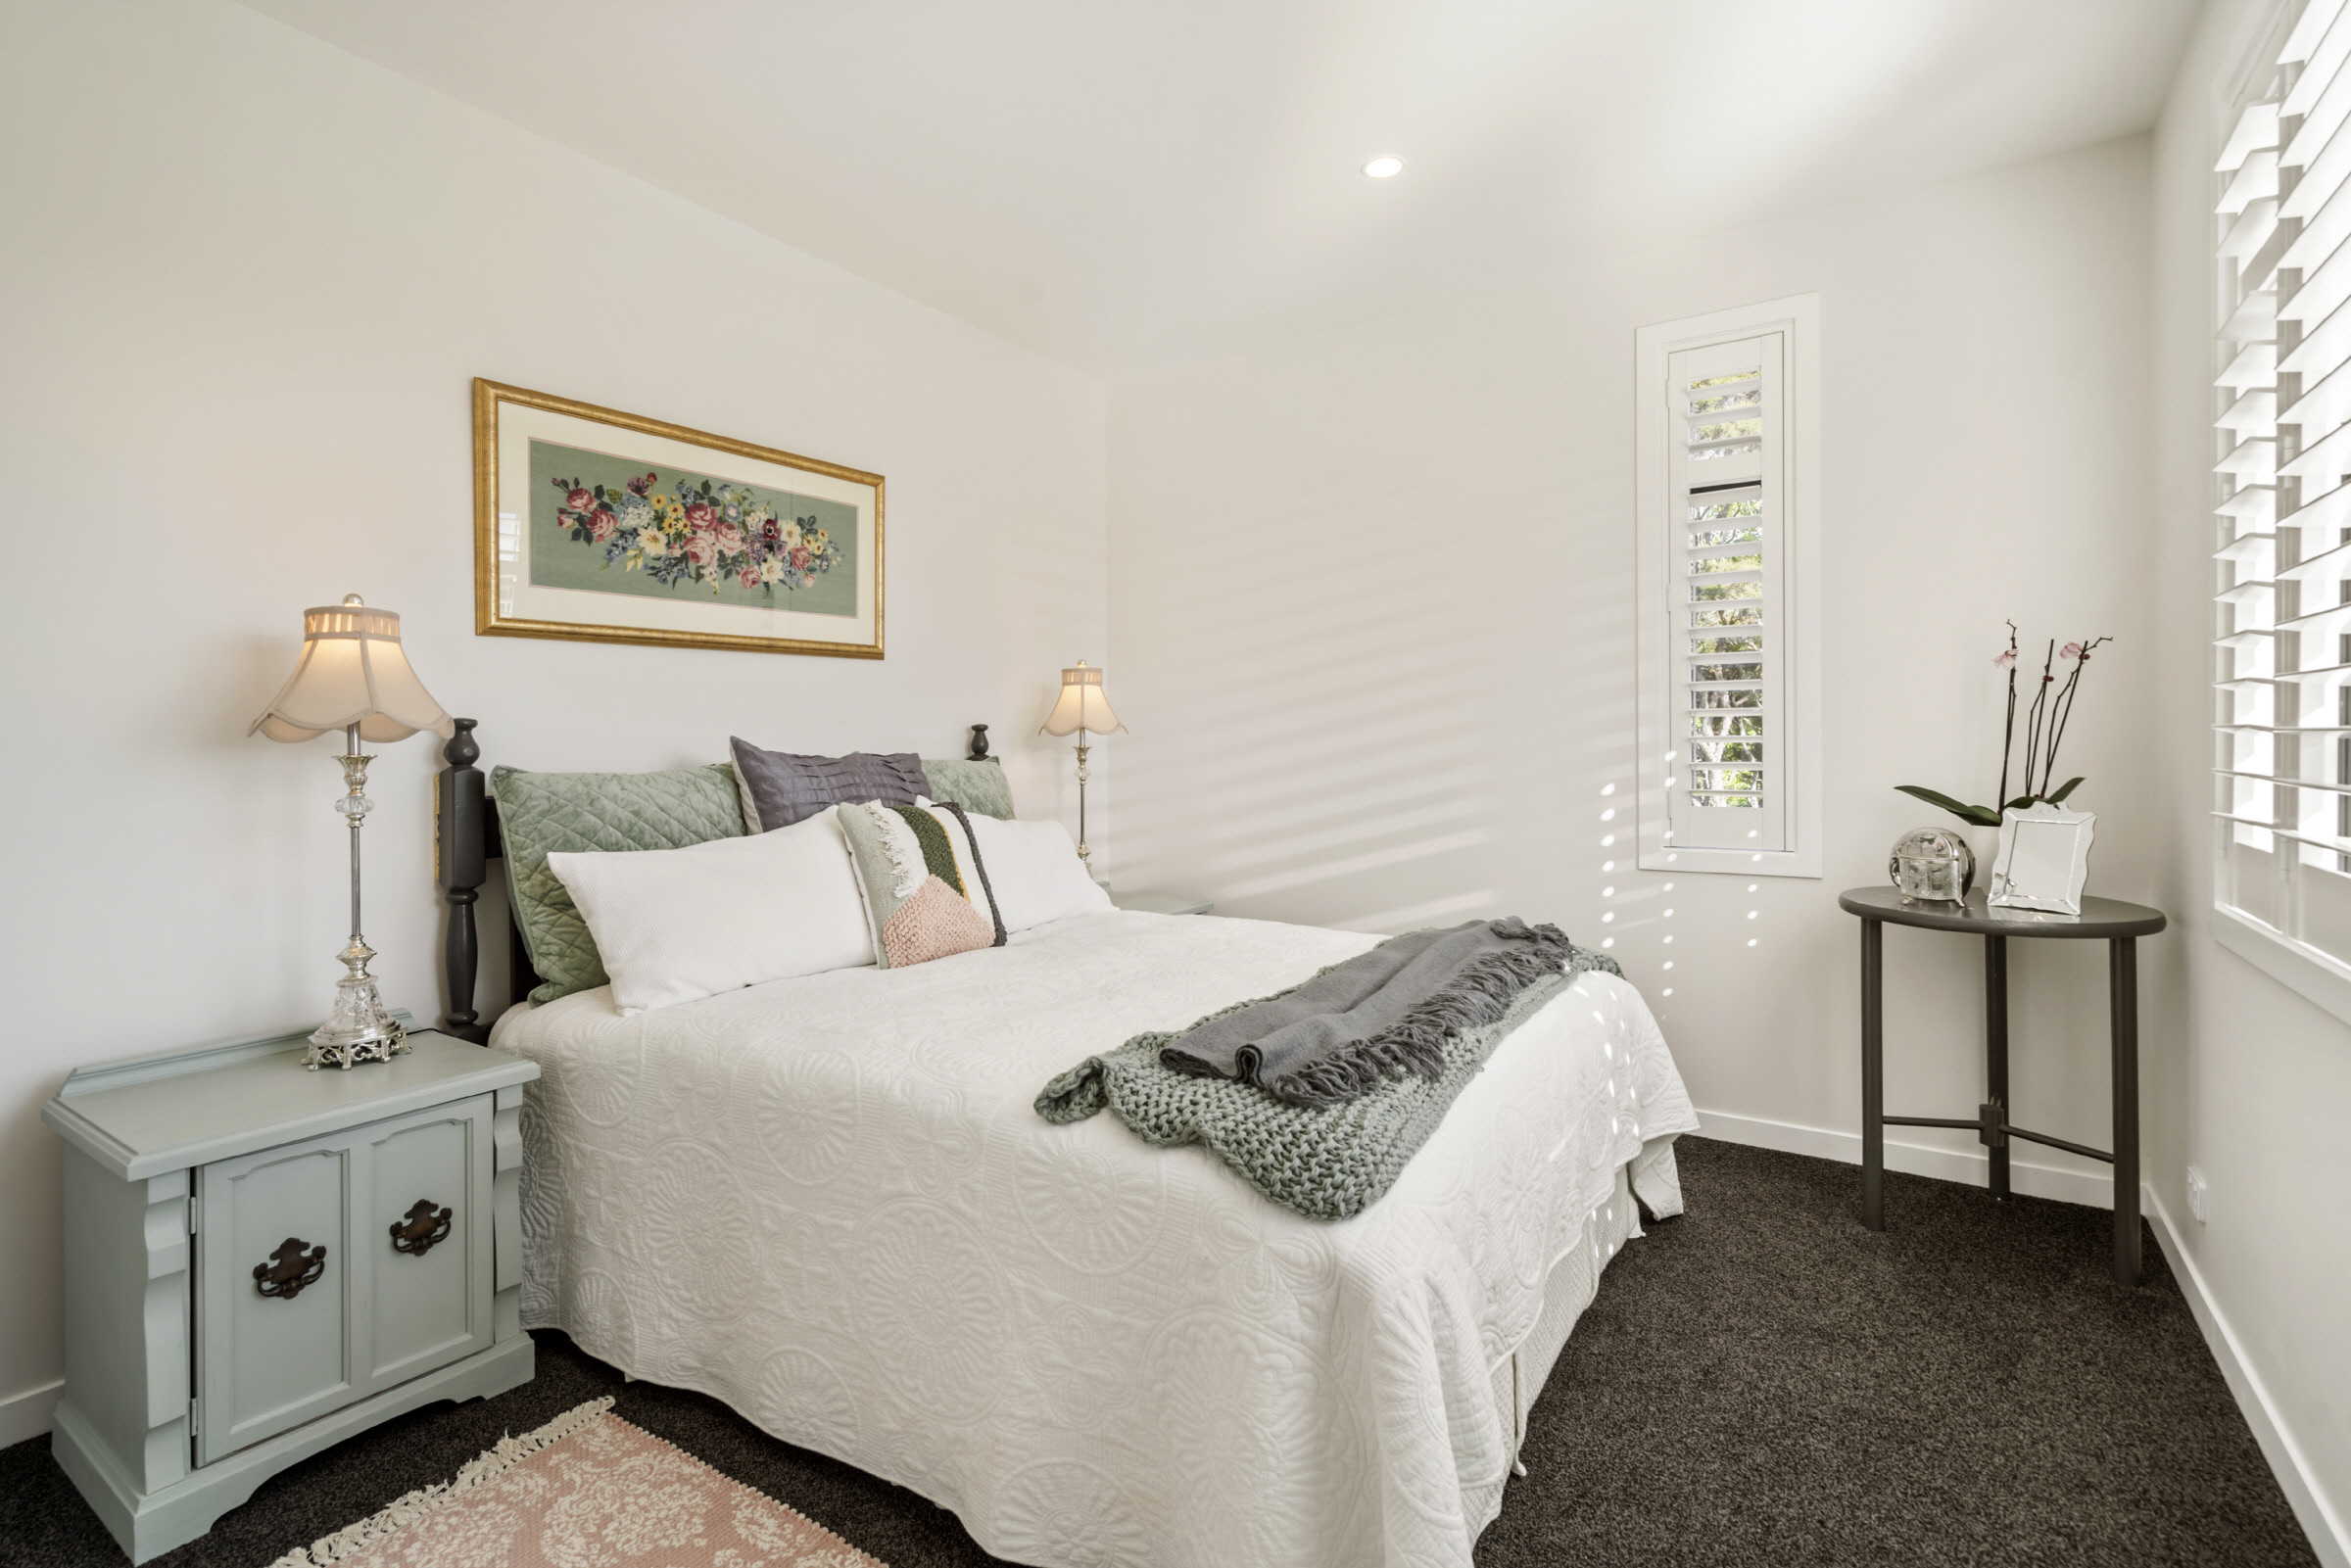 bedroom fowler homes auckland south east 20 woodlanding rd 41 low res